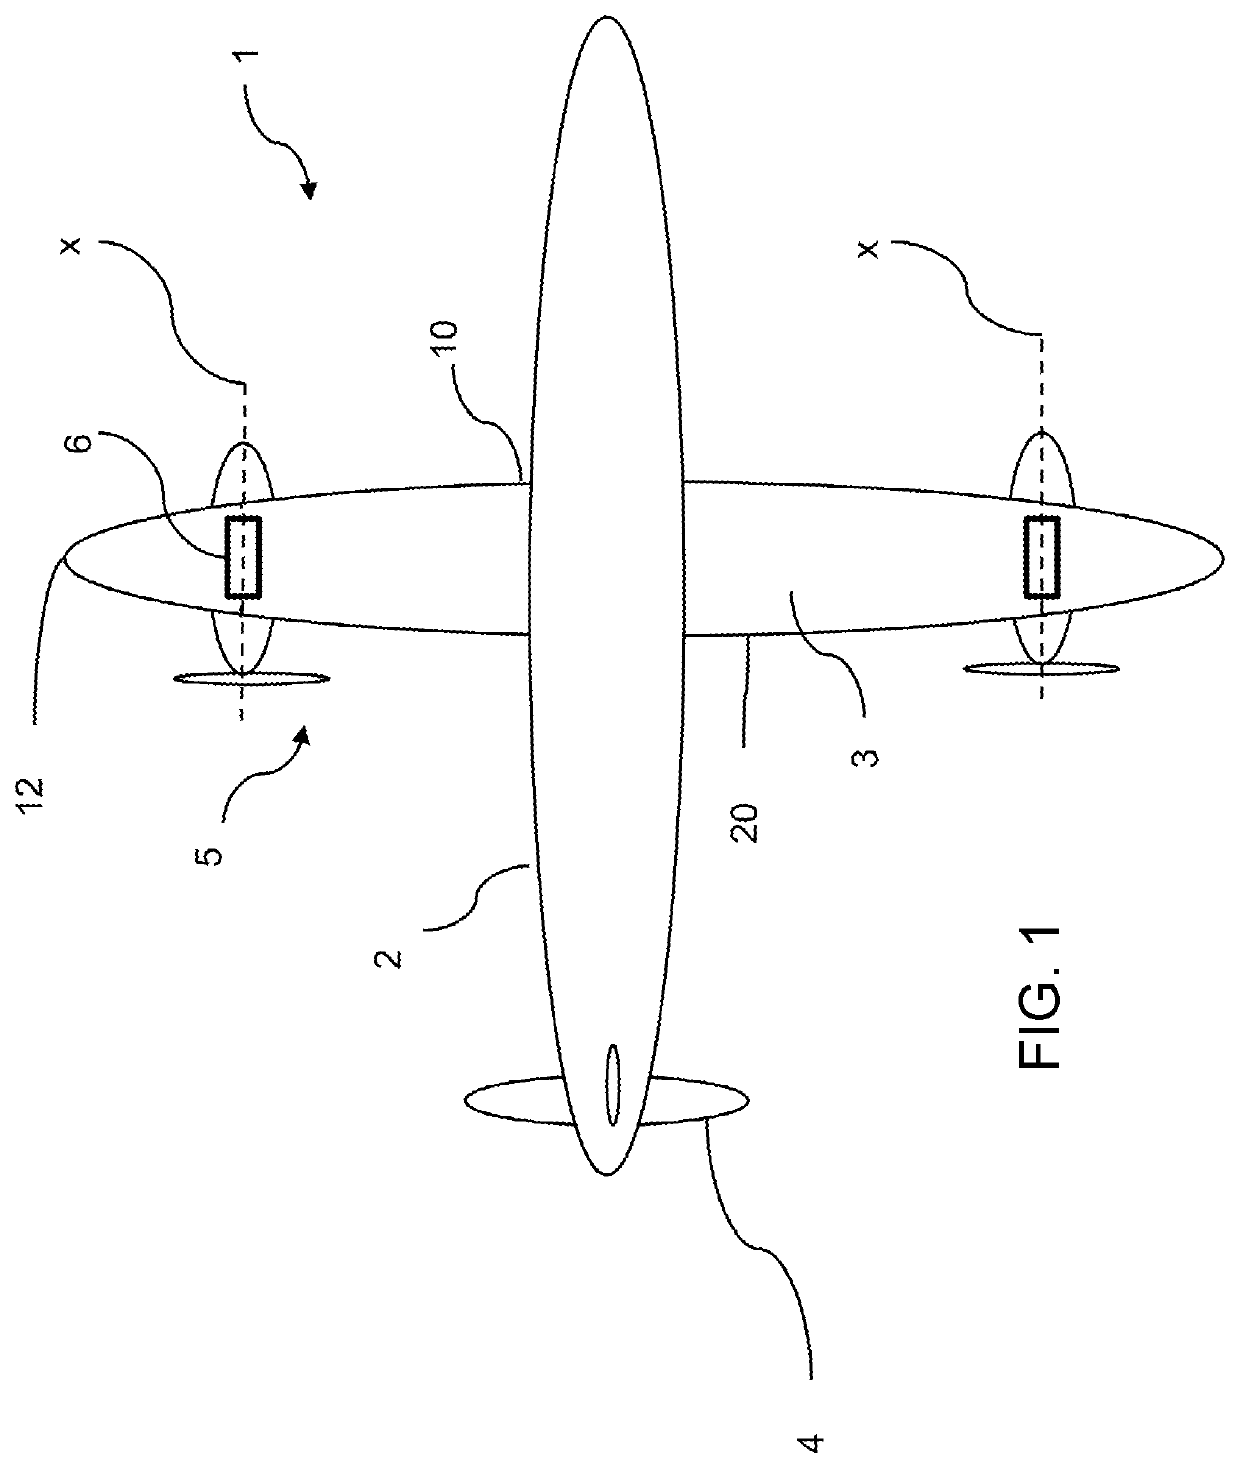 Wing integrated propulsion system